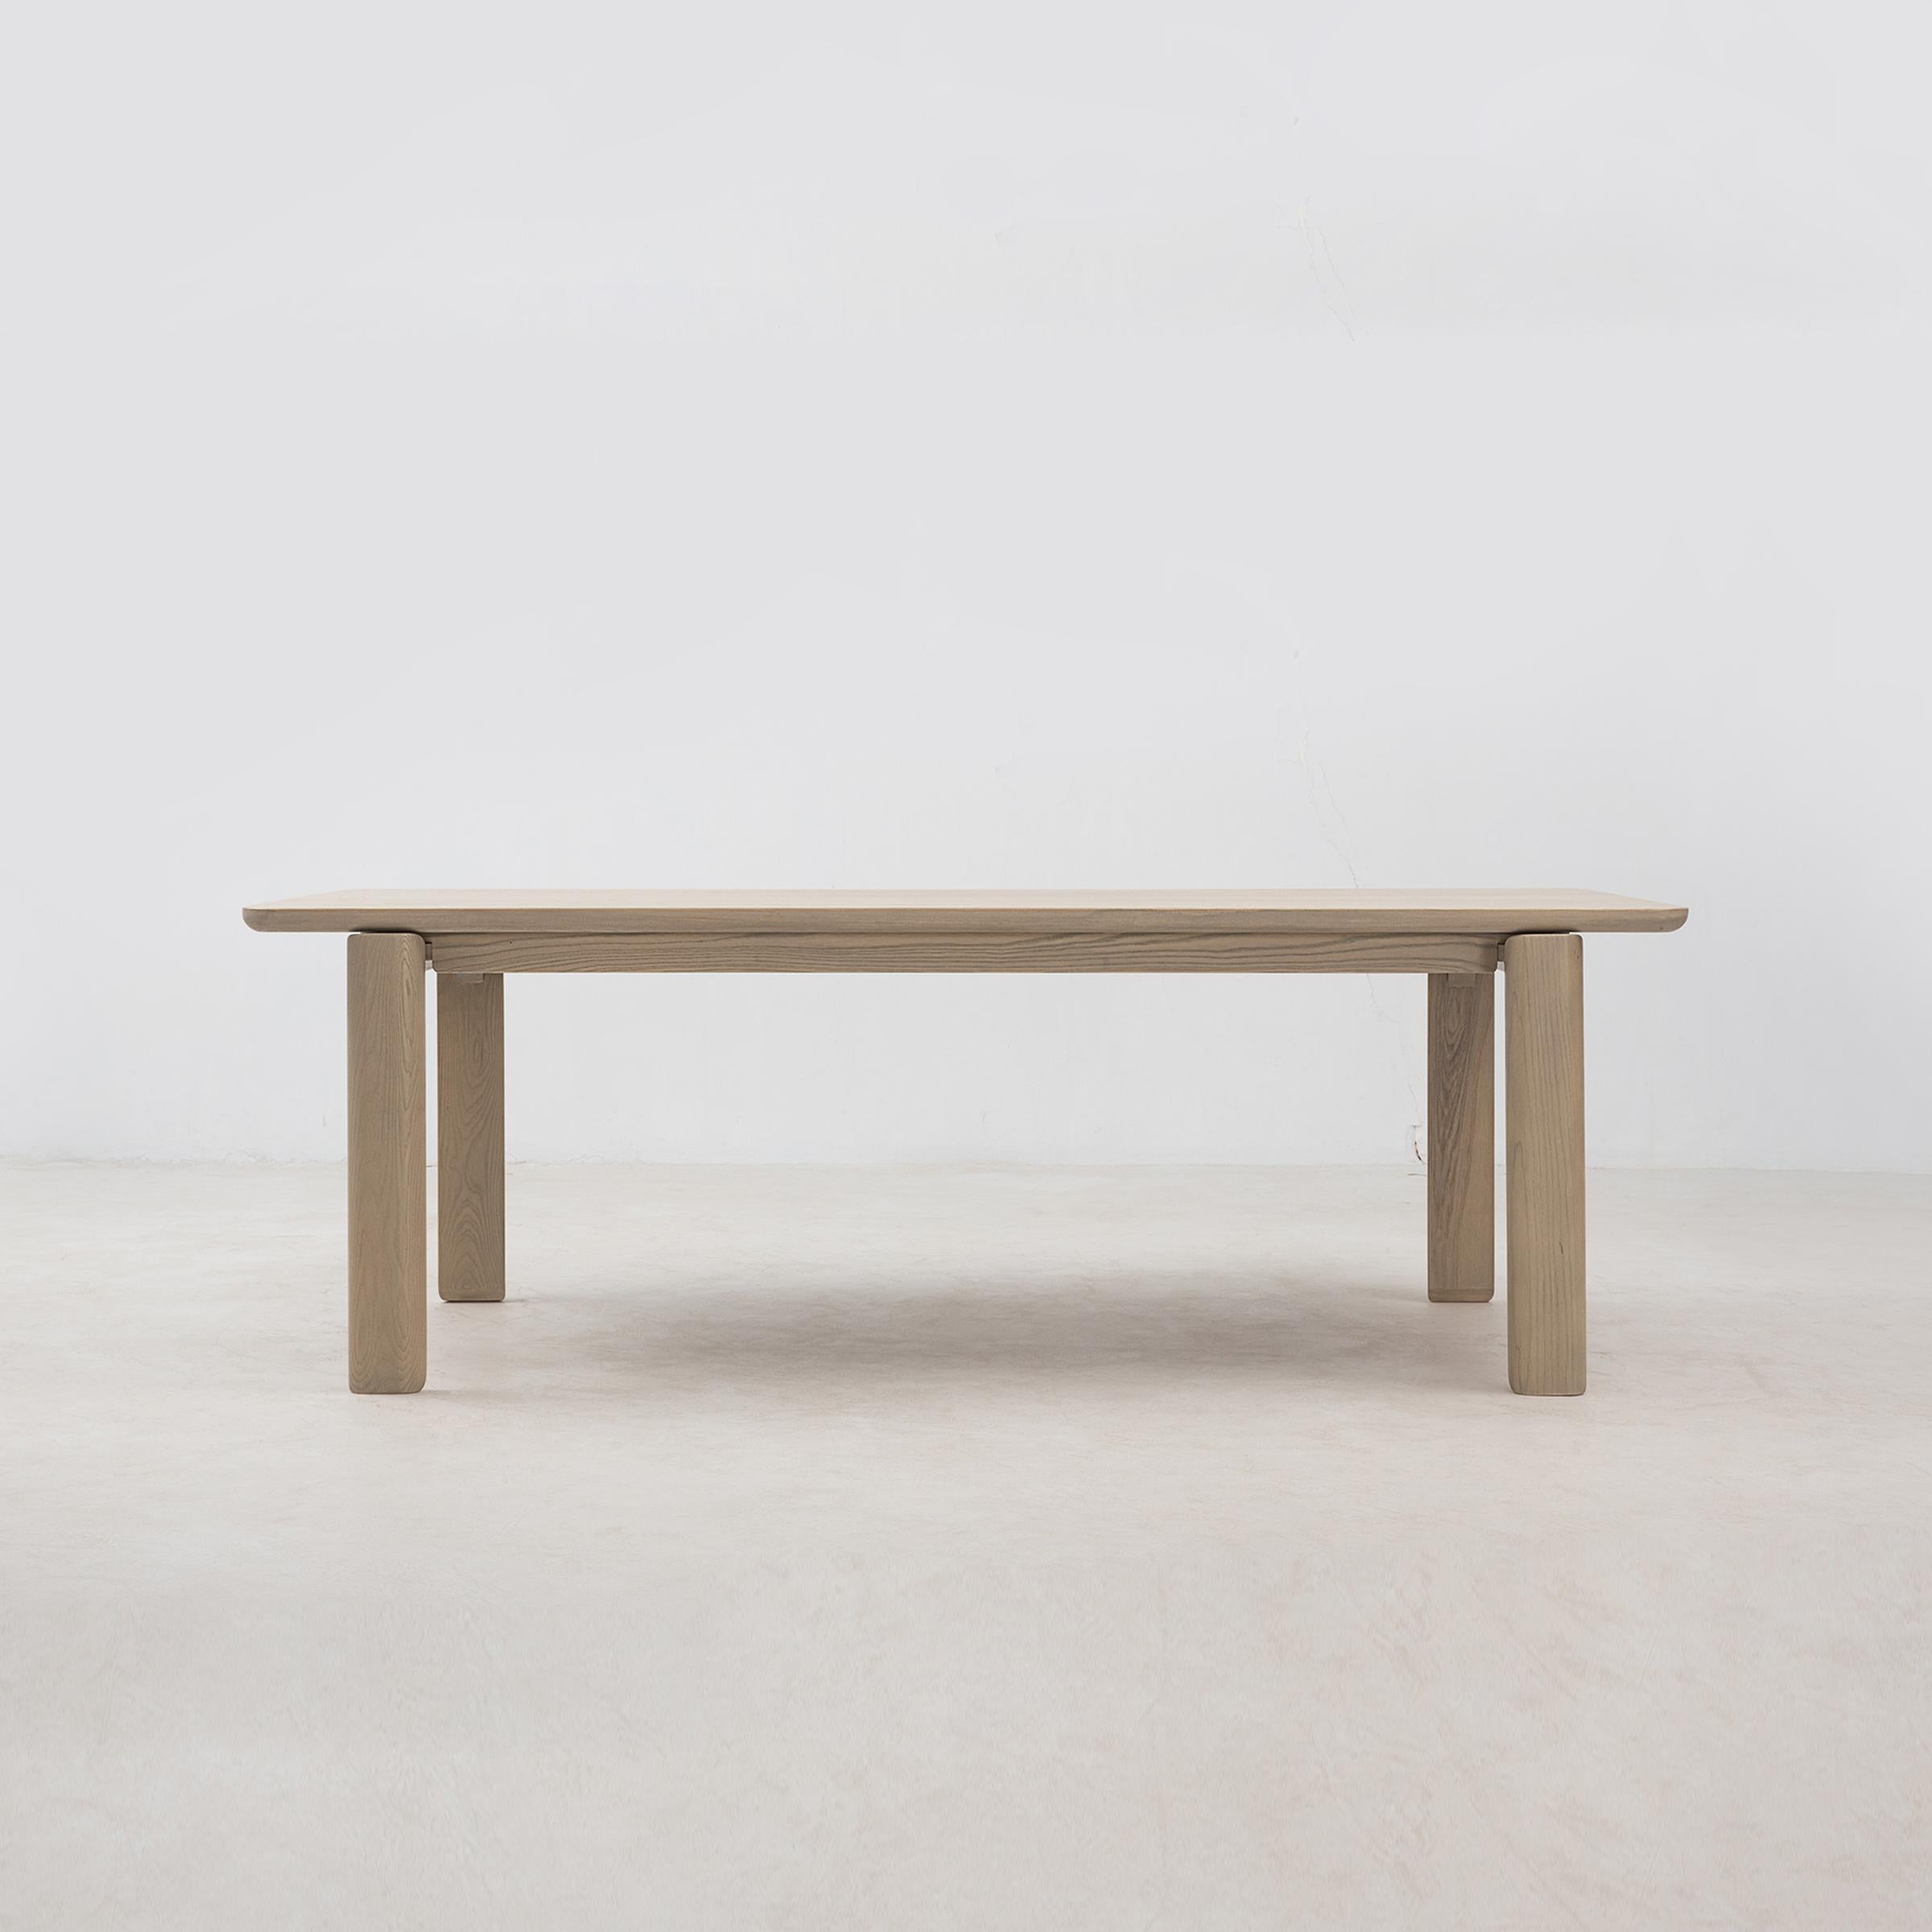 Handcrafted with FSC Certified American White Ash, the Mesa Dining Table's gentle curves and minimal form are an elegant centerpiece for your meals and gatherings. The table top floats gently off each leg for truly timeless appeal.

The Mesa